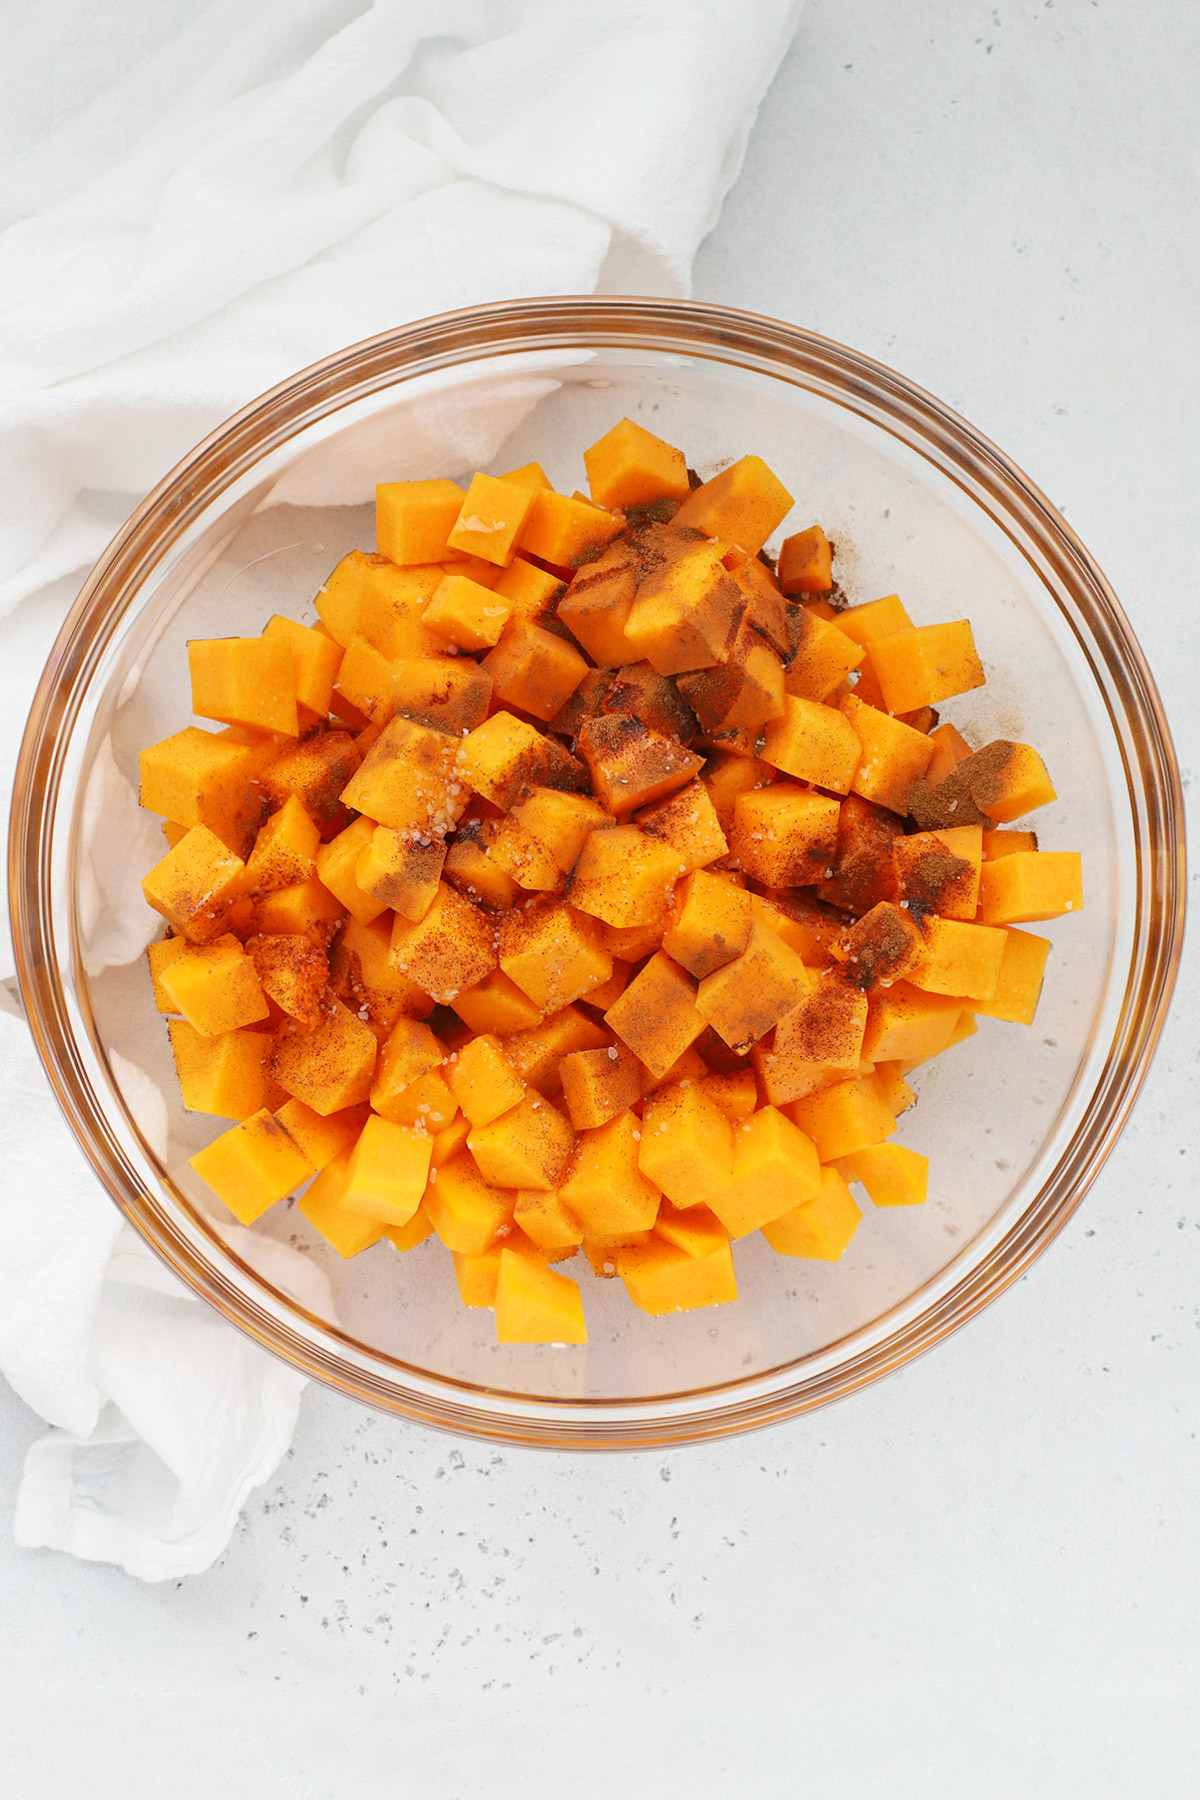 Overhead view of ingredients for roasted cinnamon butternut squash in a mixing bowl